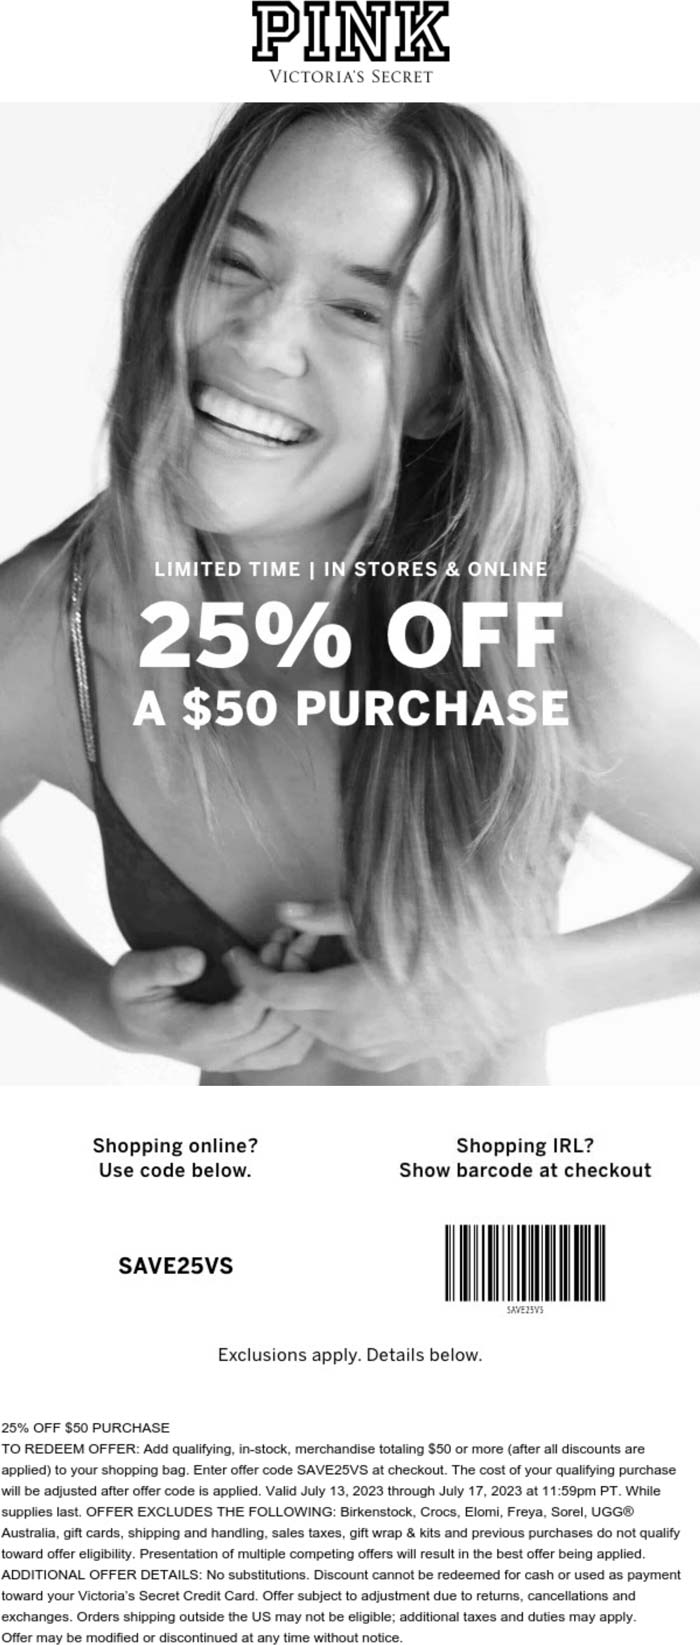 PINK stores Coupon  25% off $50 today at PINK, or online via promo code SAVE25VS #pink 